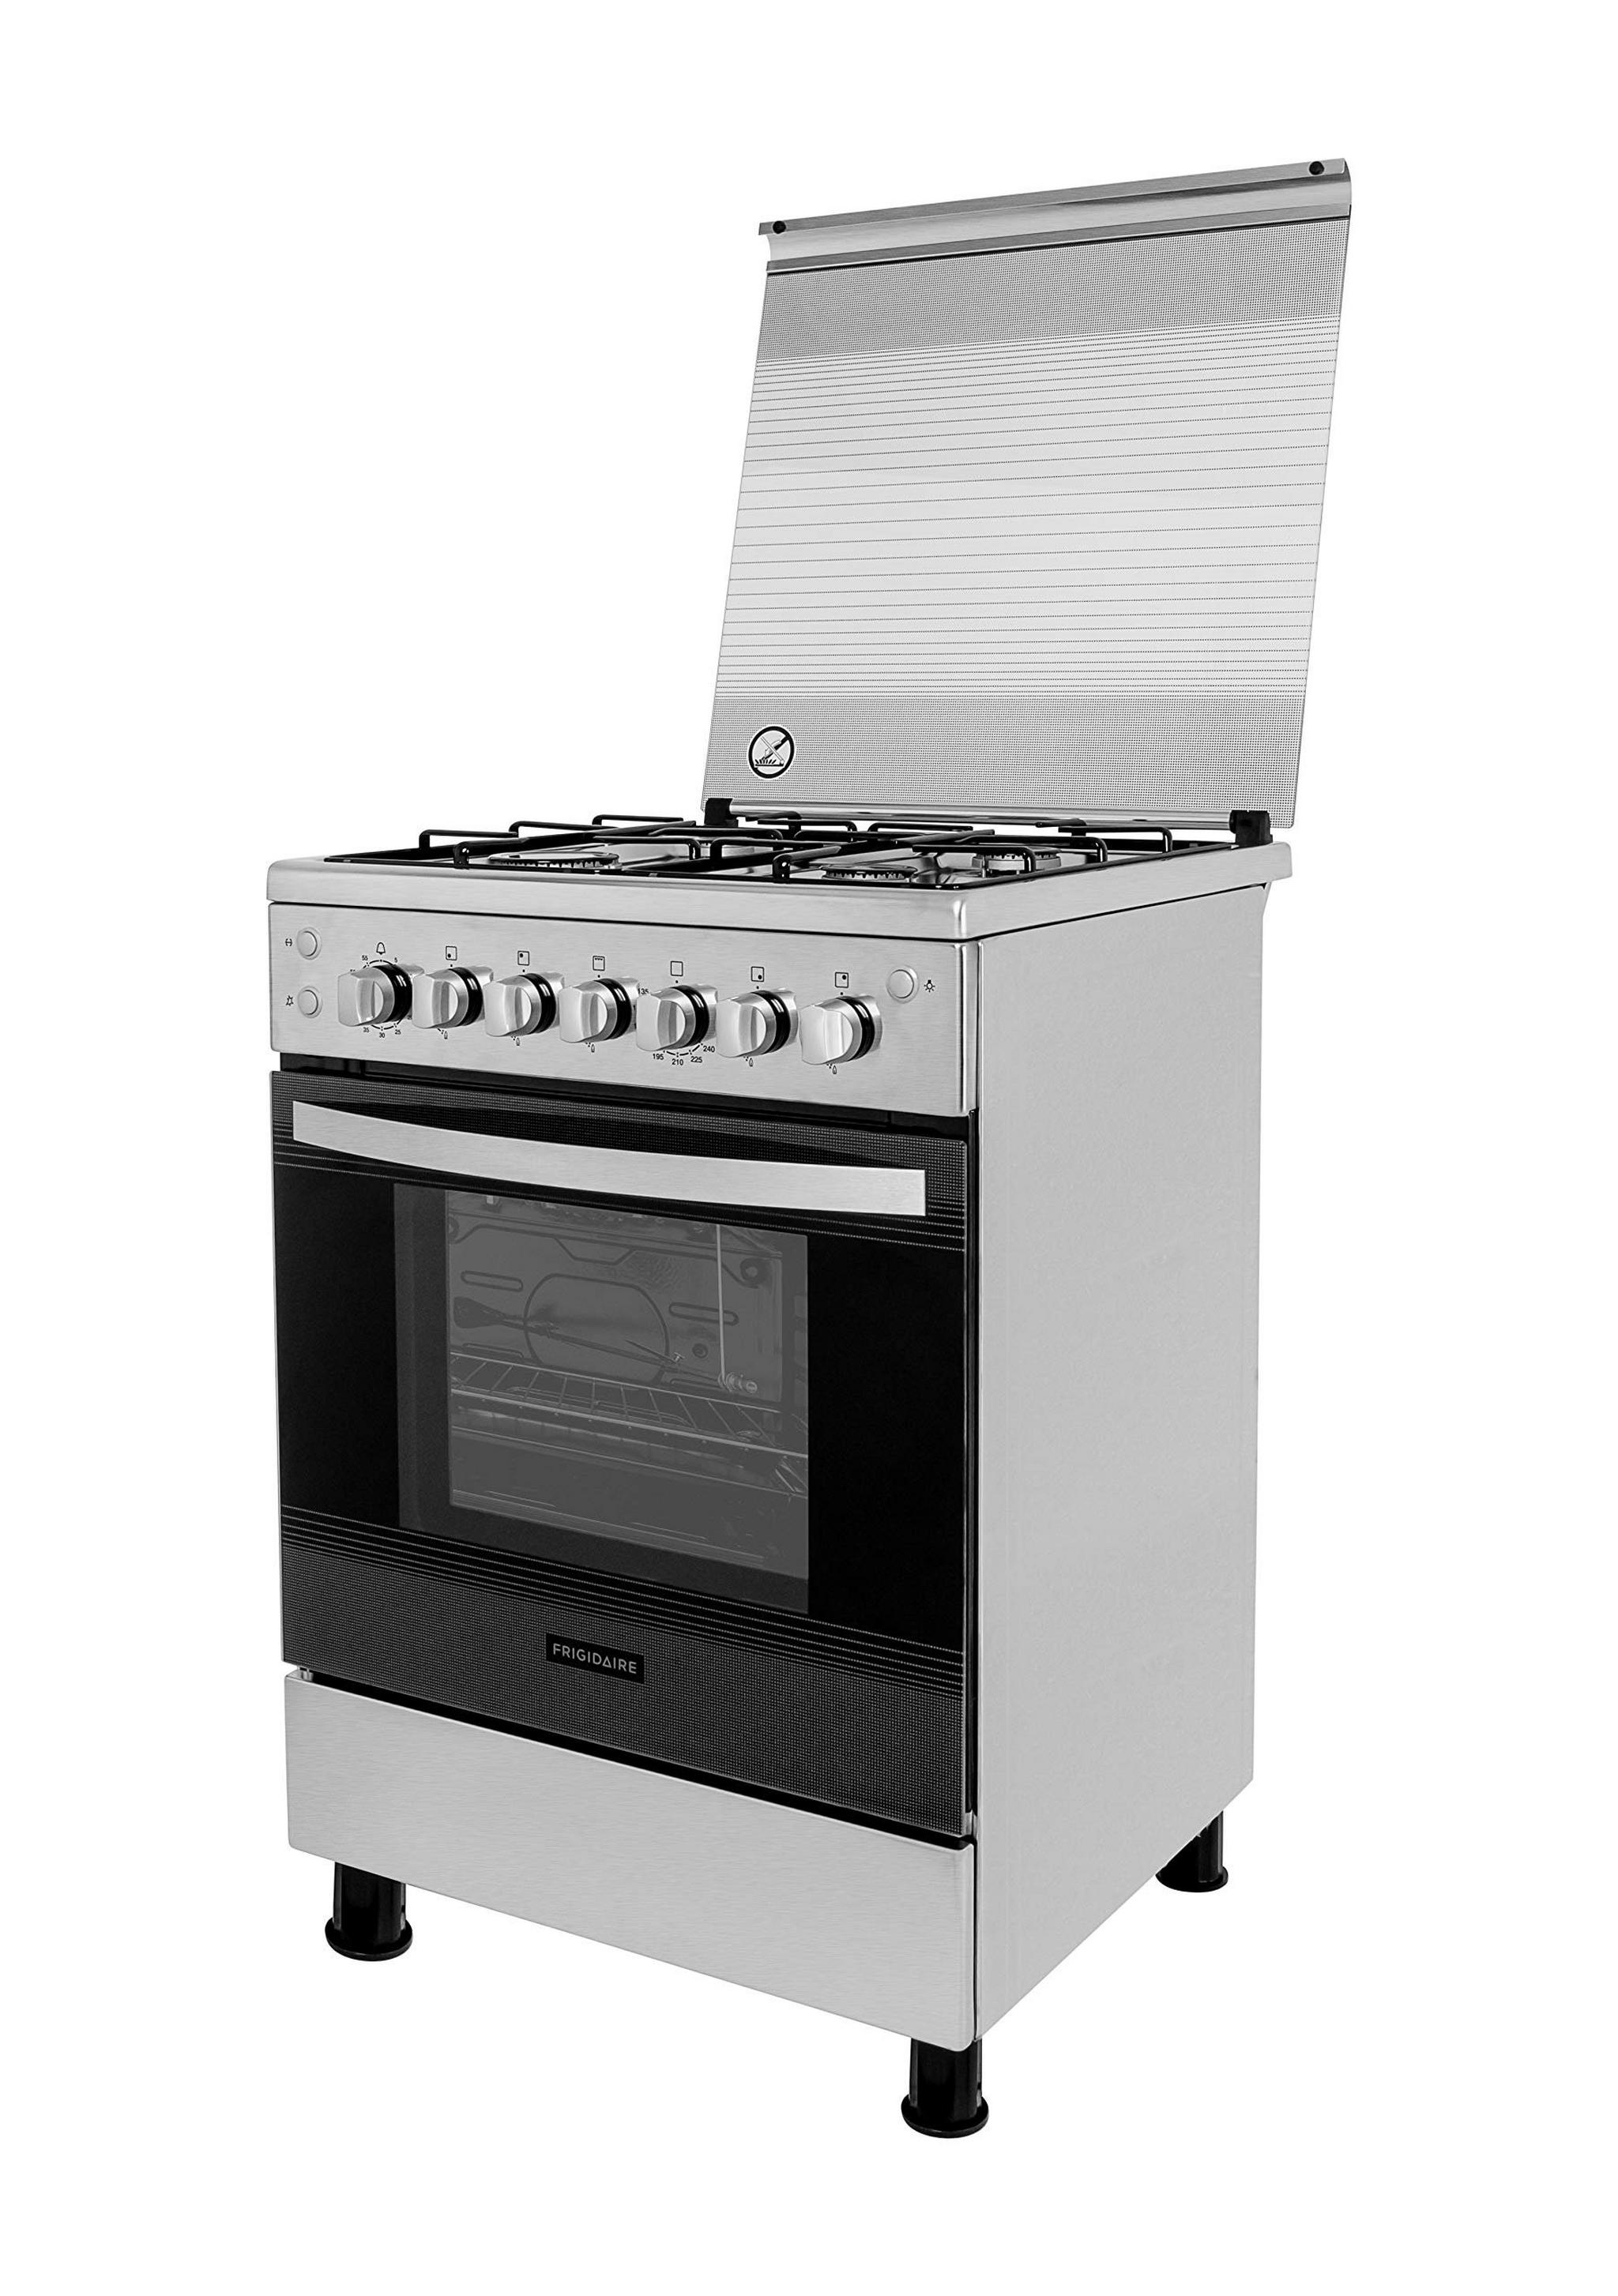 Frigidaire 60X60cm 4 Burner Gas Cooker (FNGB60JGRSO) - Stainless Steel